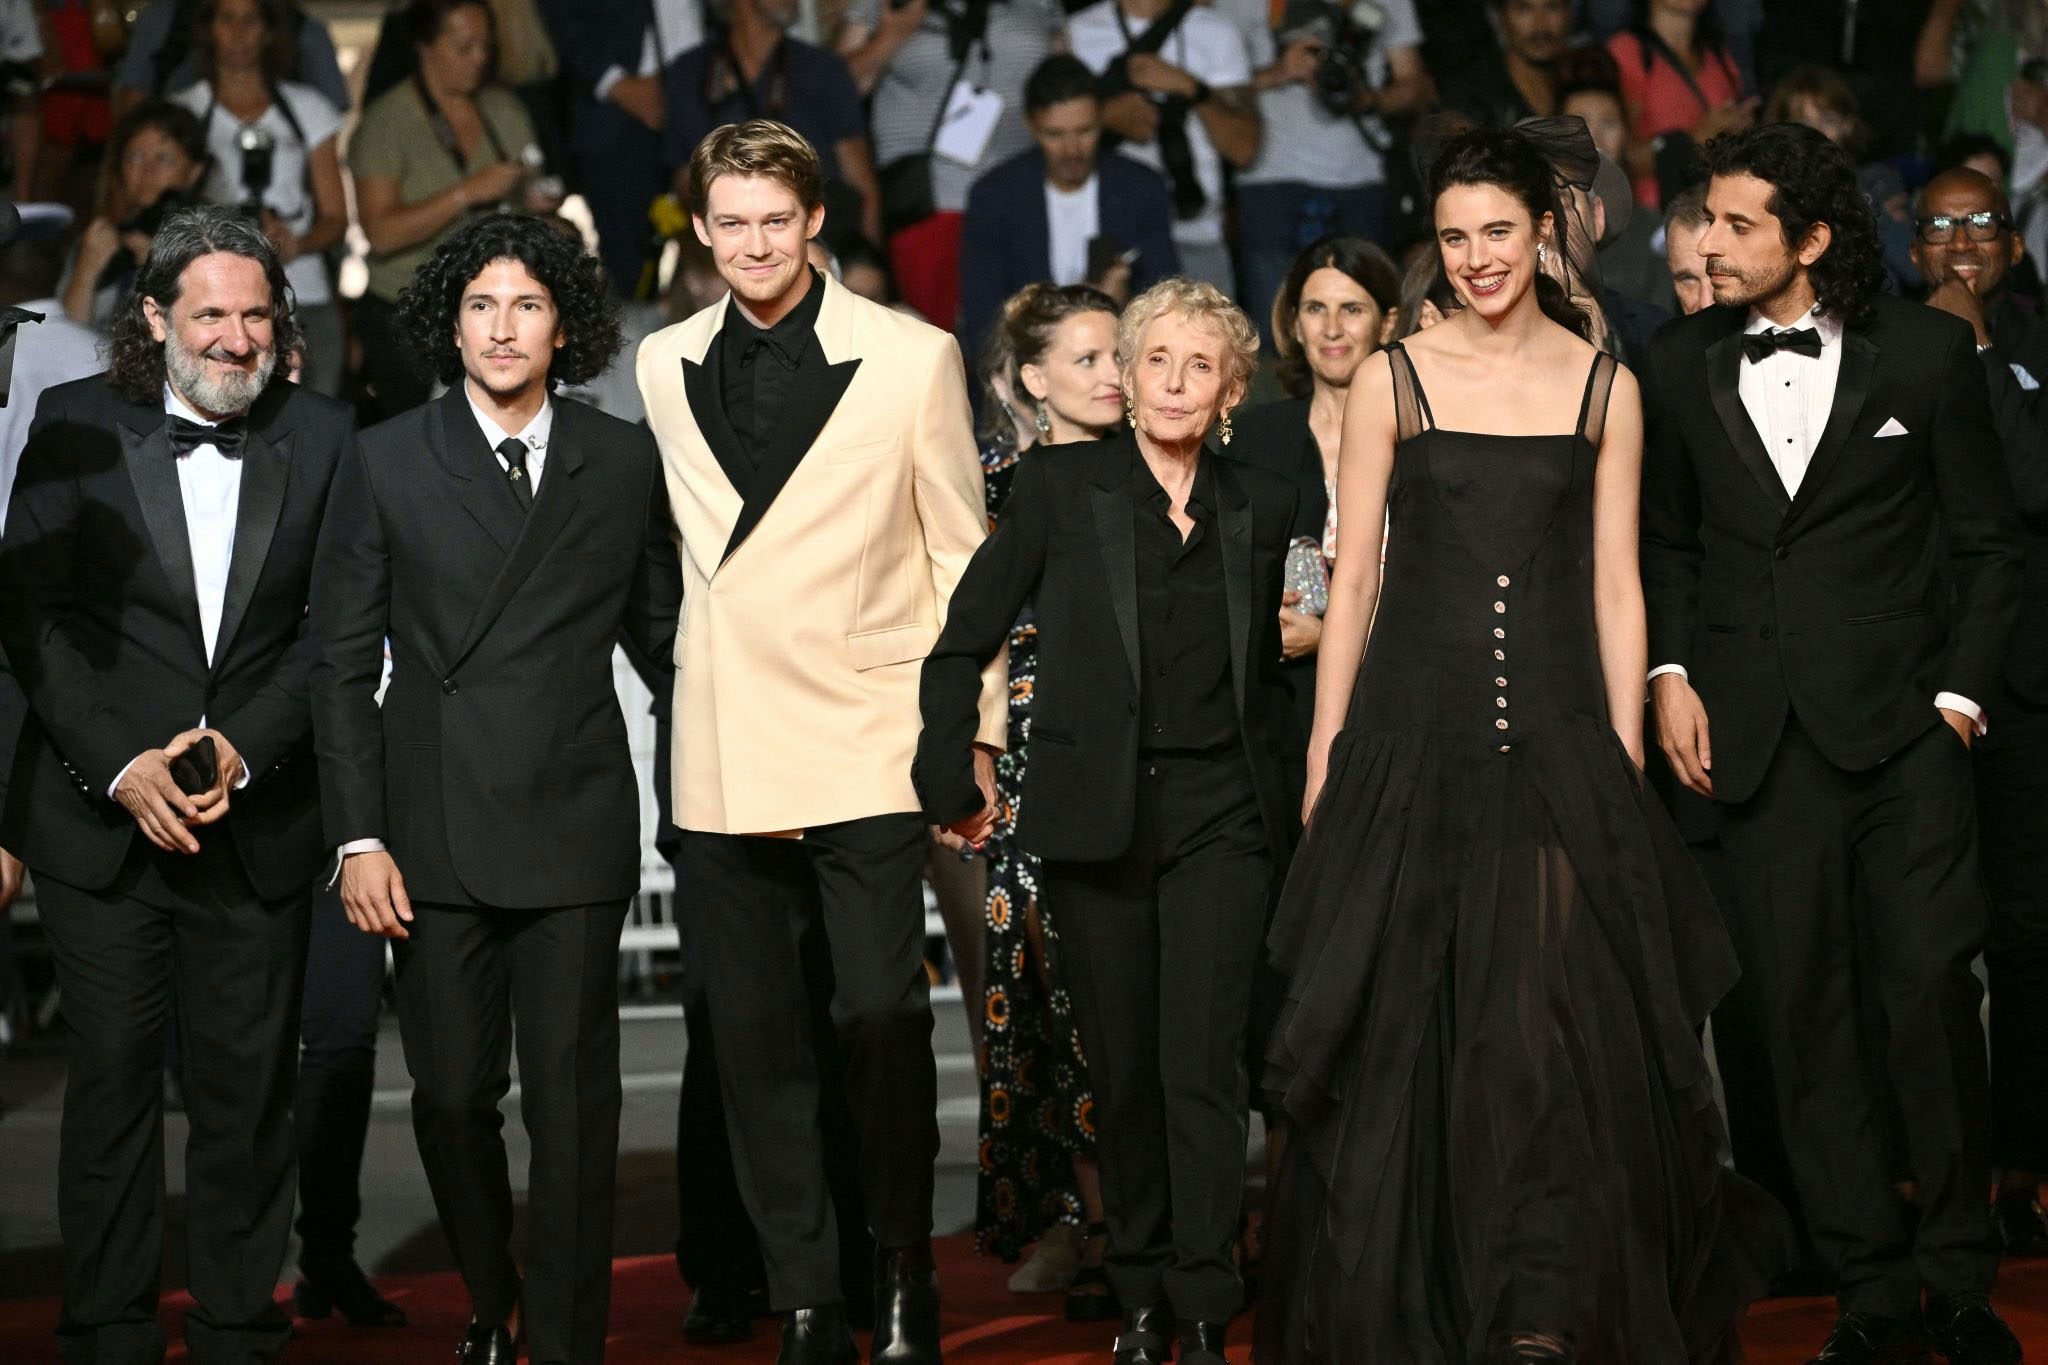 Photos: “Stars At Noon” Cannes Premiere